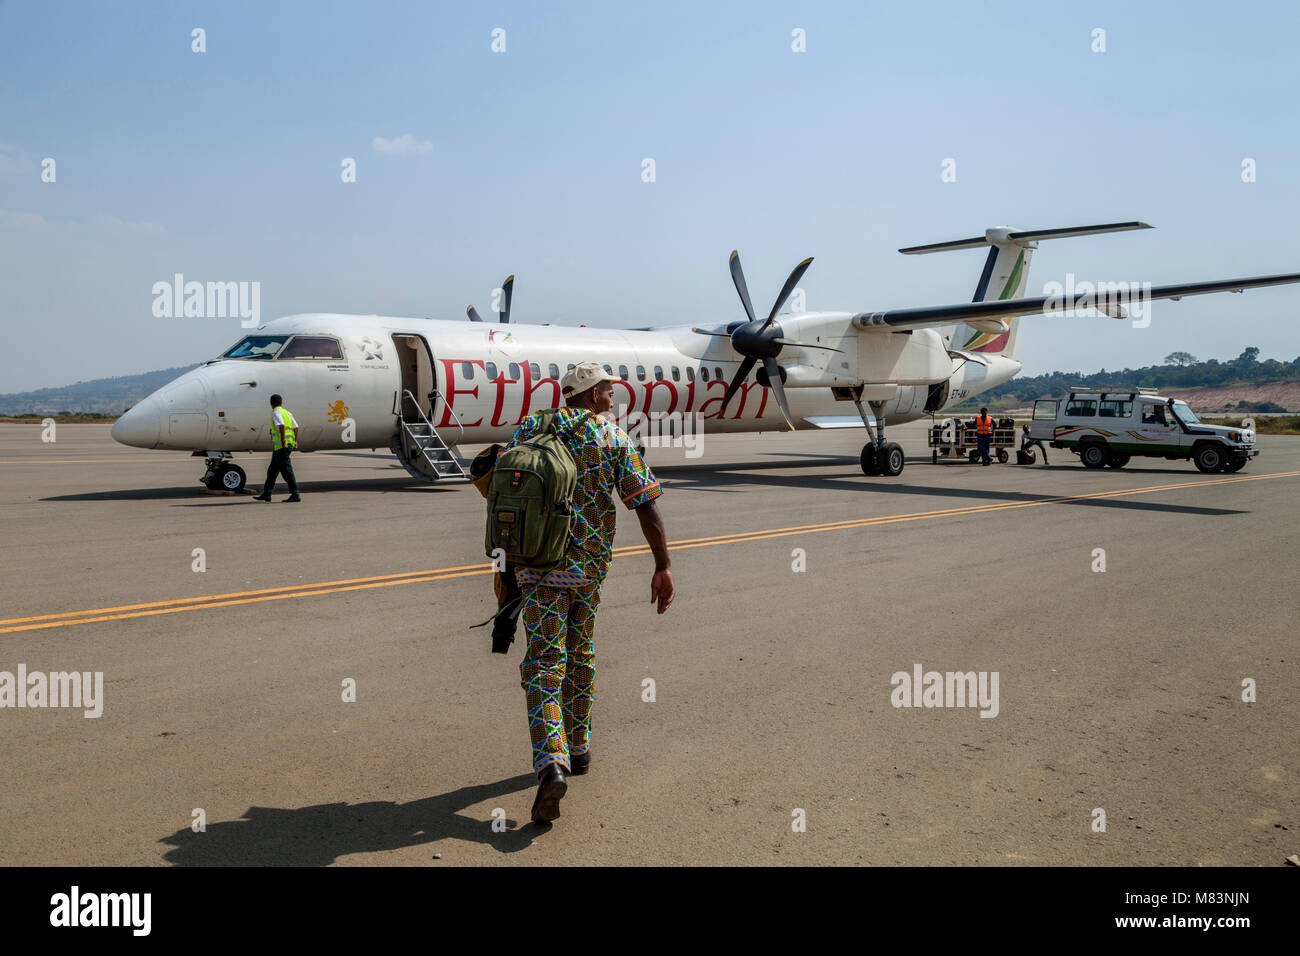 An Man Boarding An Ethiopian Airlines Flight At Jinka Airport, Omo Valley, Ethiopia Stock Photo